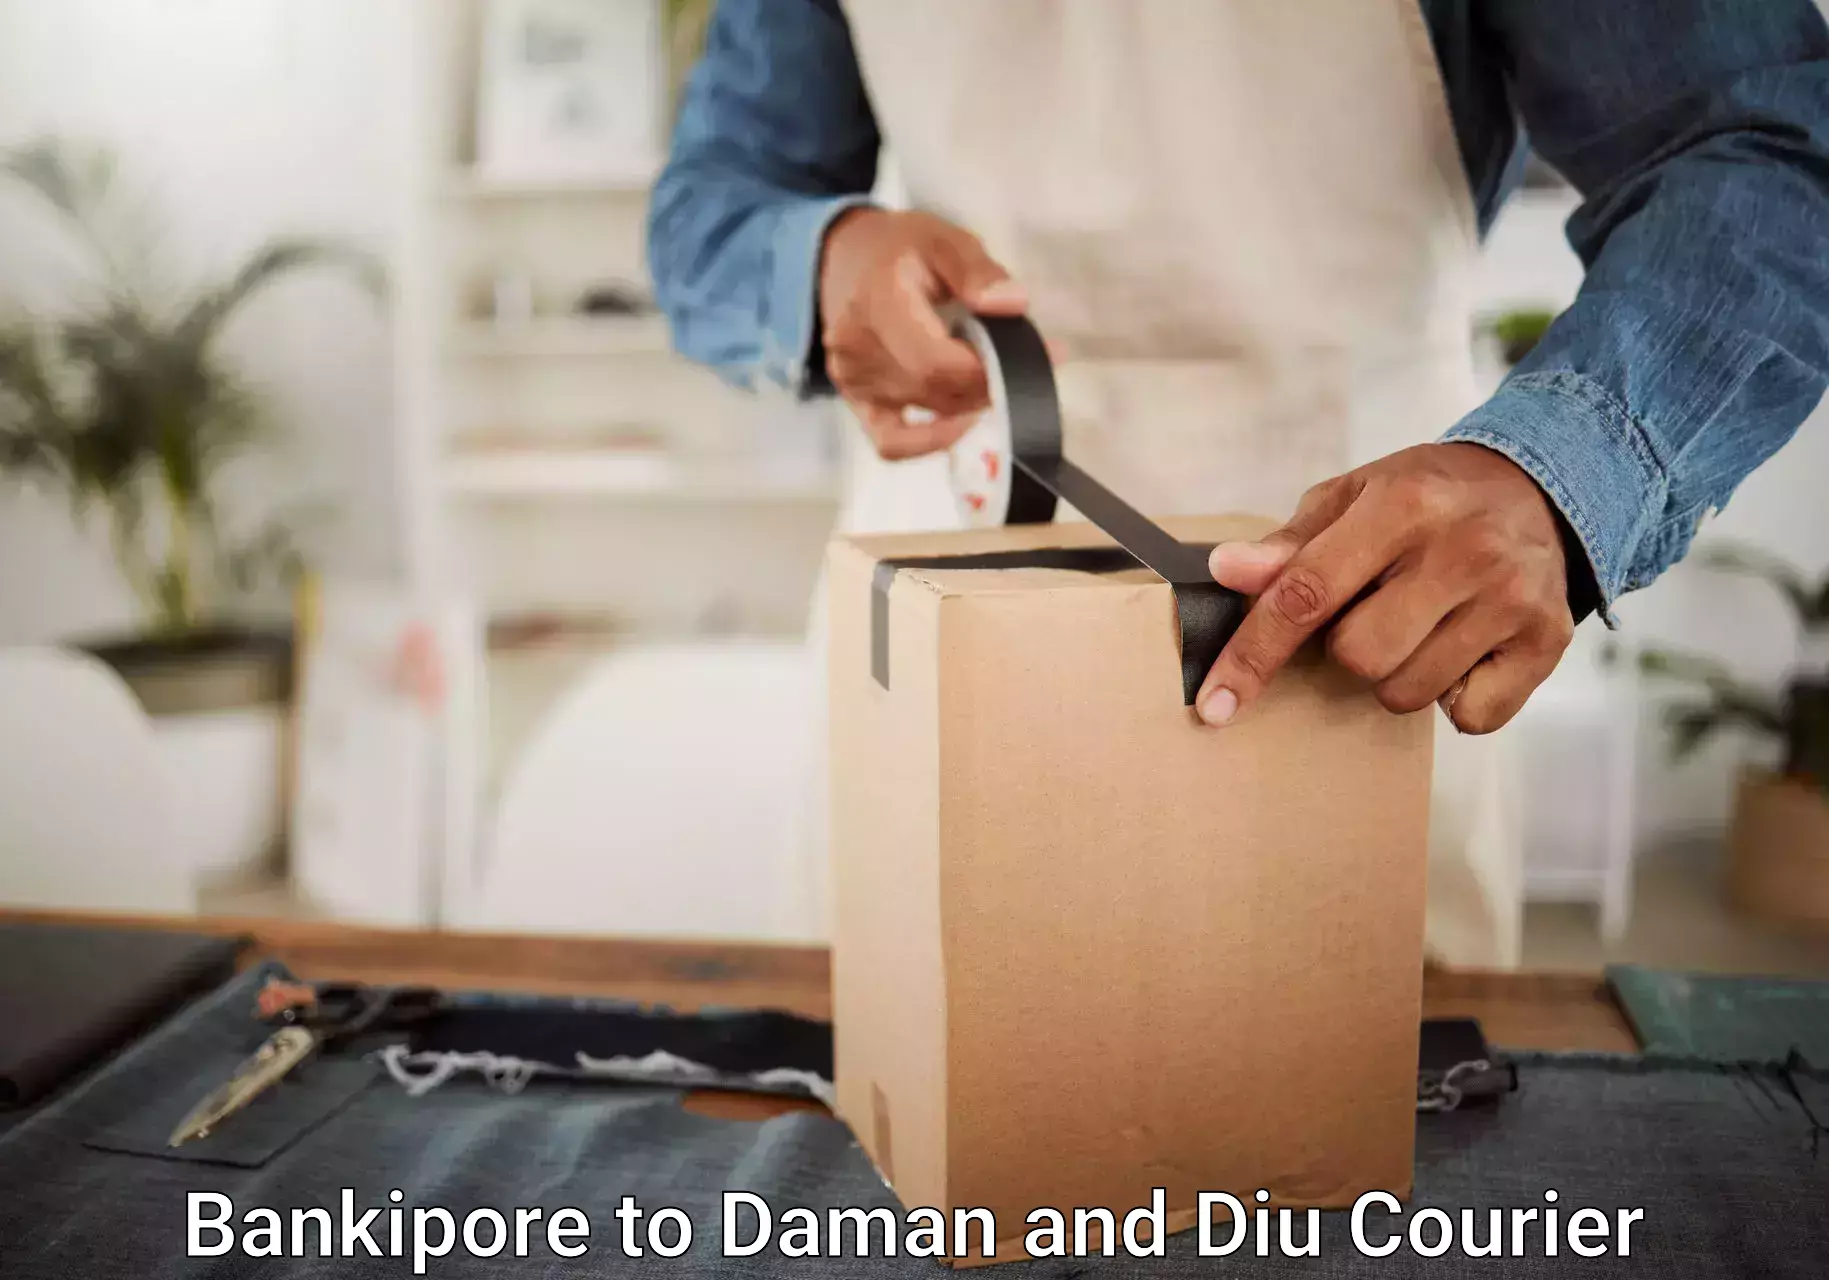 Luggage shipment specialists Bankipore to Daman and Diu